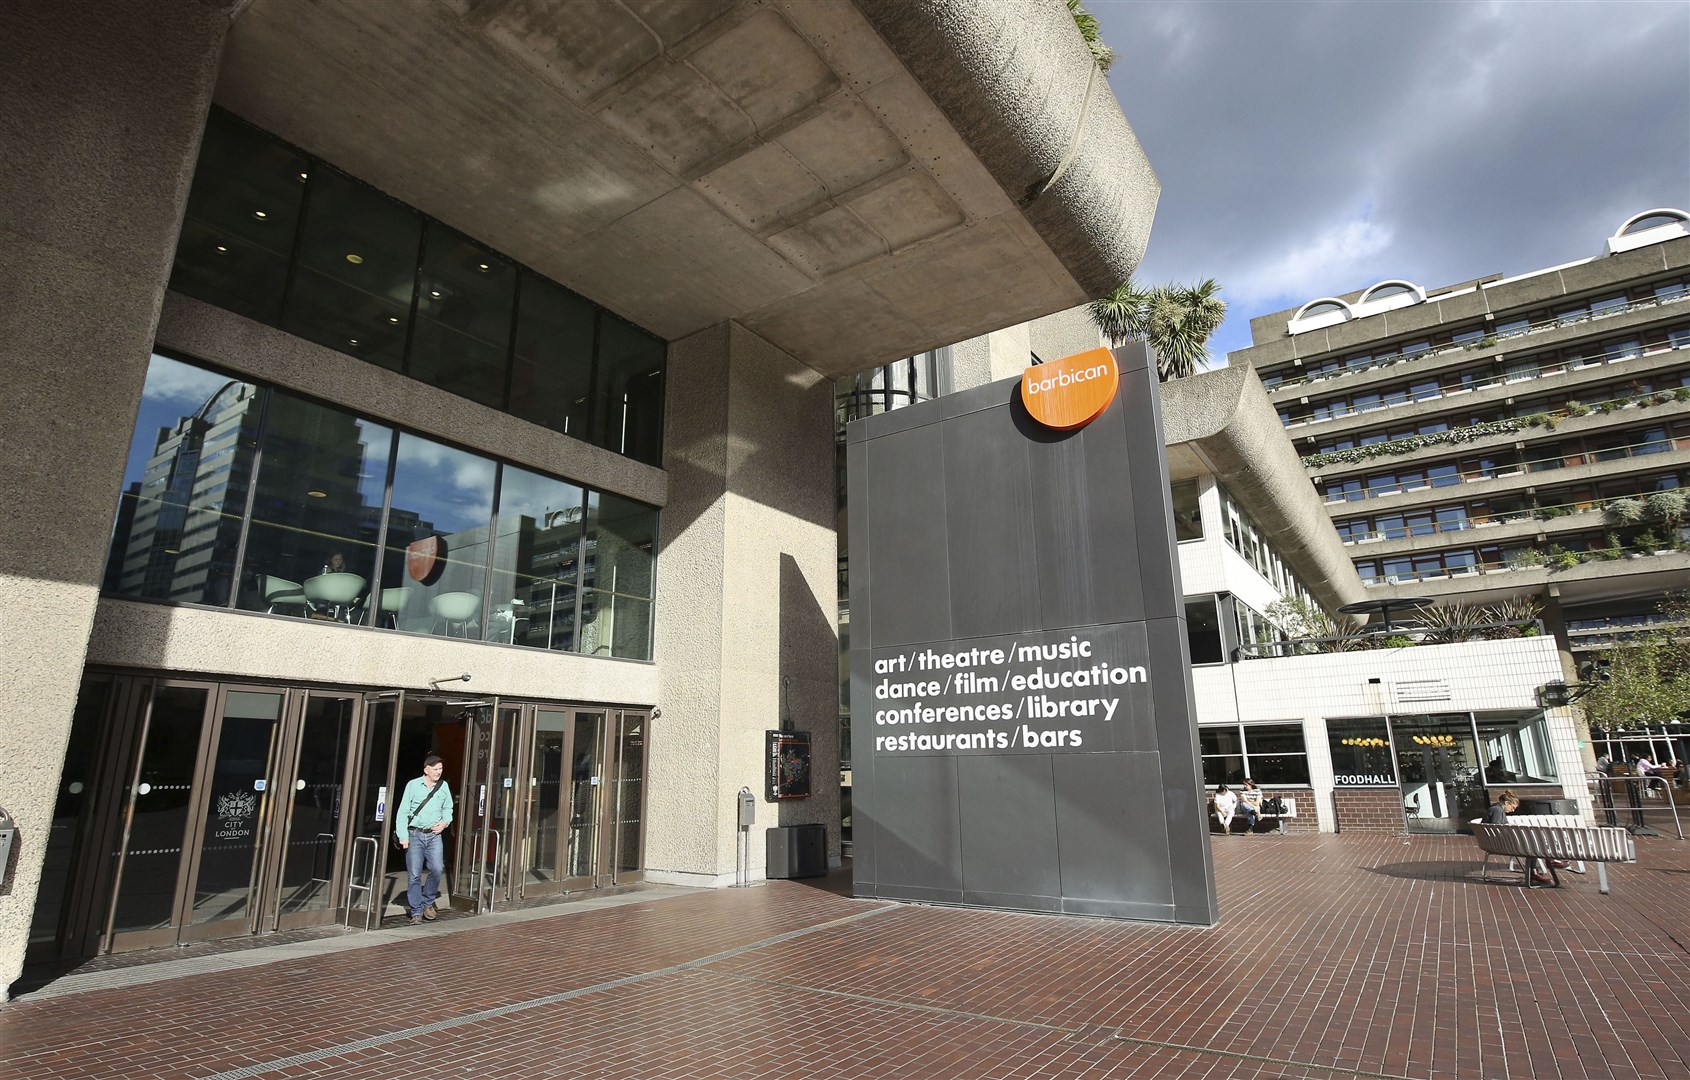 The London Starts Here campaign seeks to raise awareness of The Barbican Quarter as an area of international and historic significance (Philip Toscano/PA)